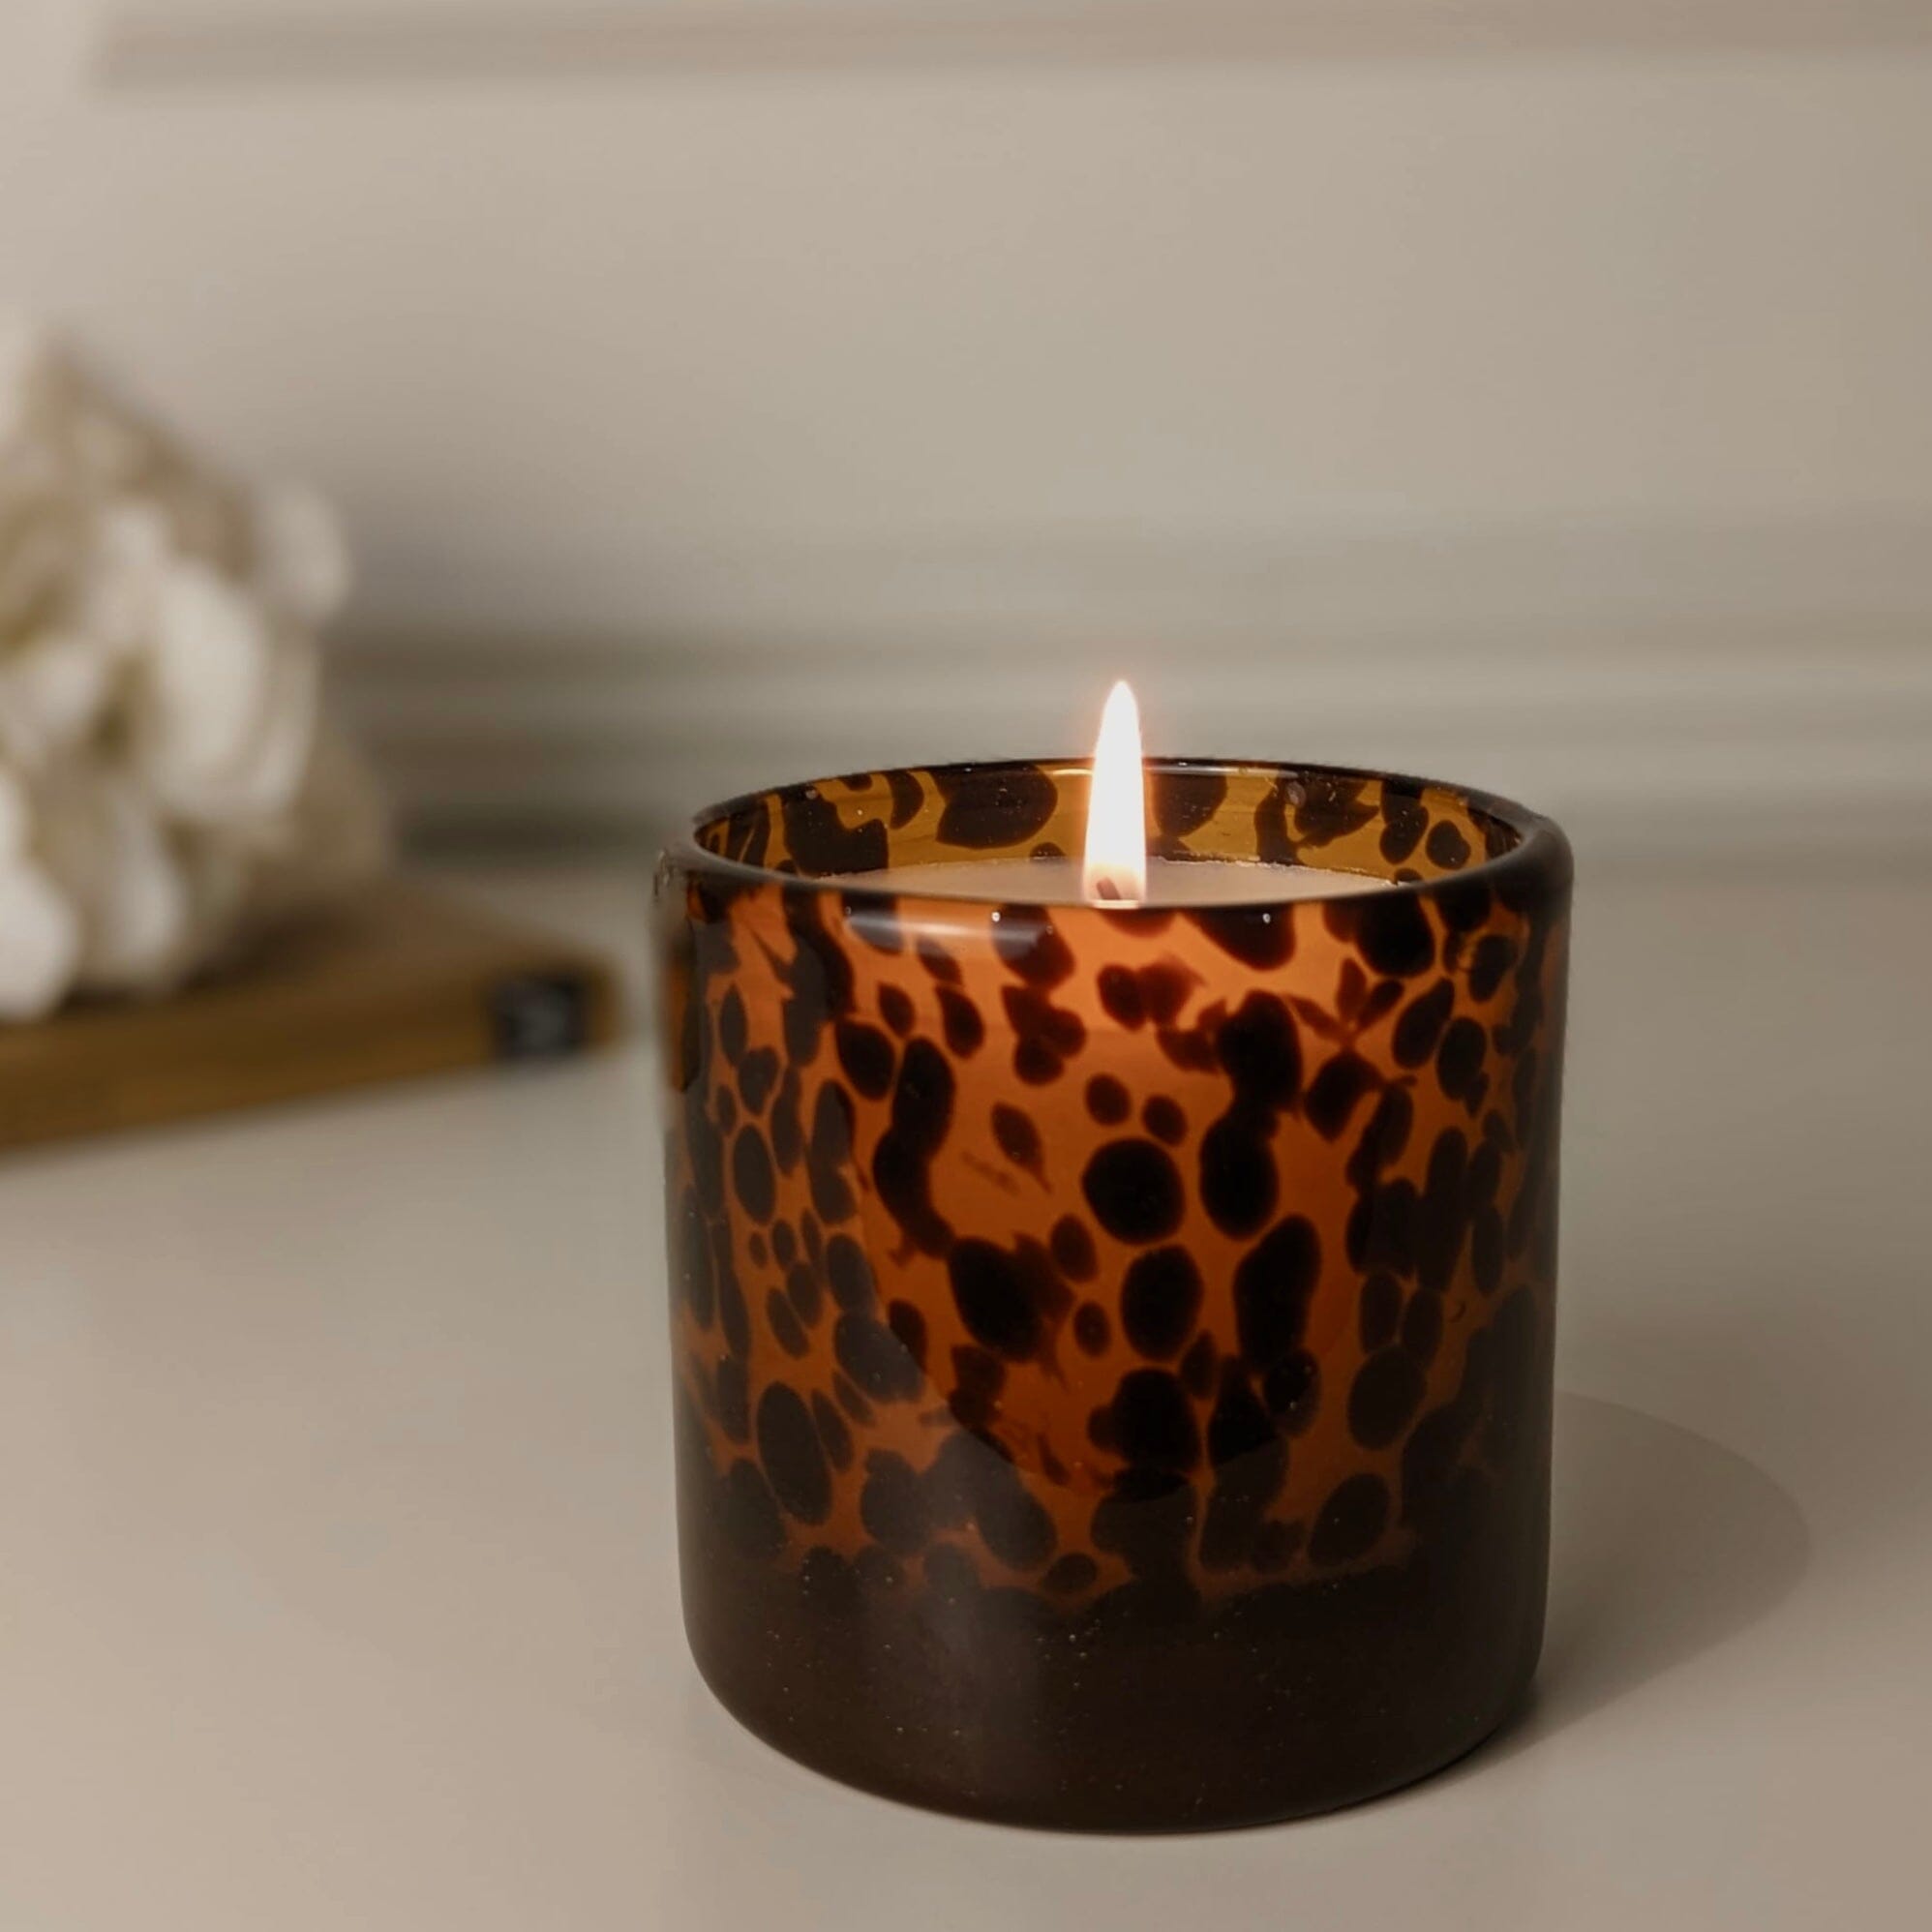 General Wax & Candle  3 x 6 SCENTED MOTTLED PILLAR CANDLES - General Wax  & Candle